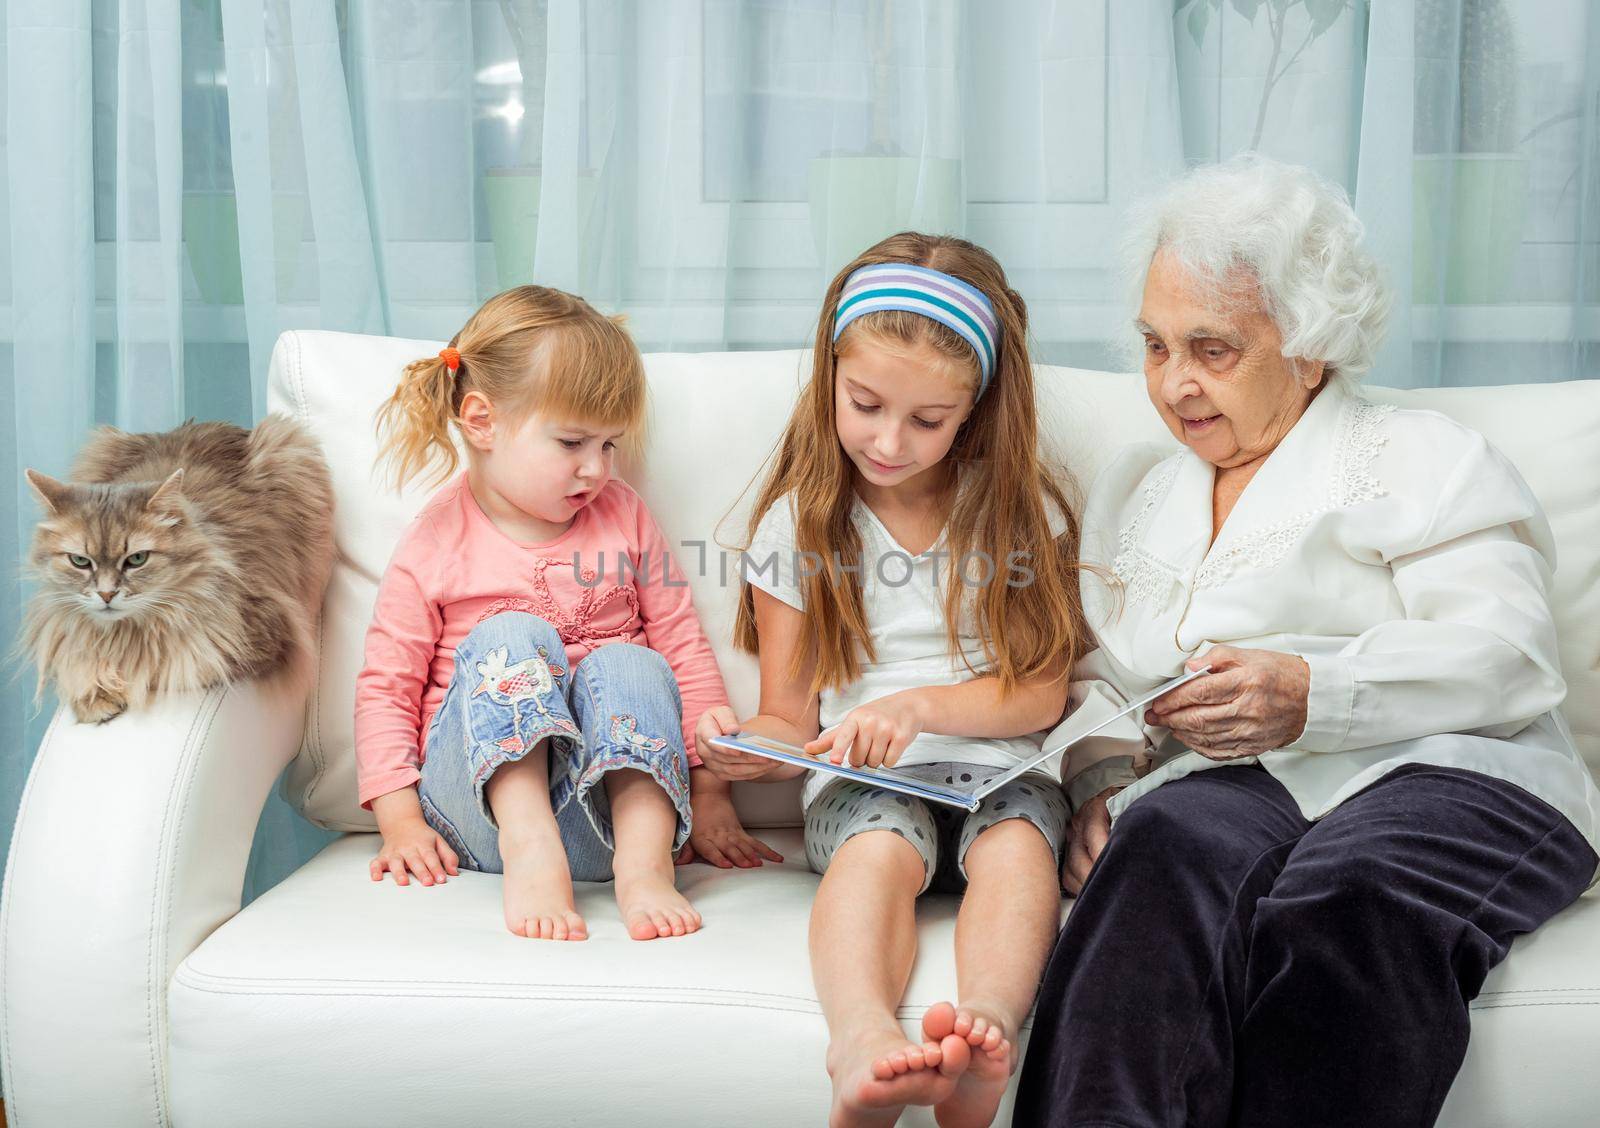 elderly woman with granddaughters reading book by tan4ikk1